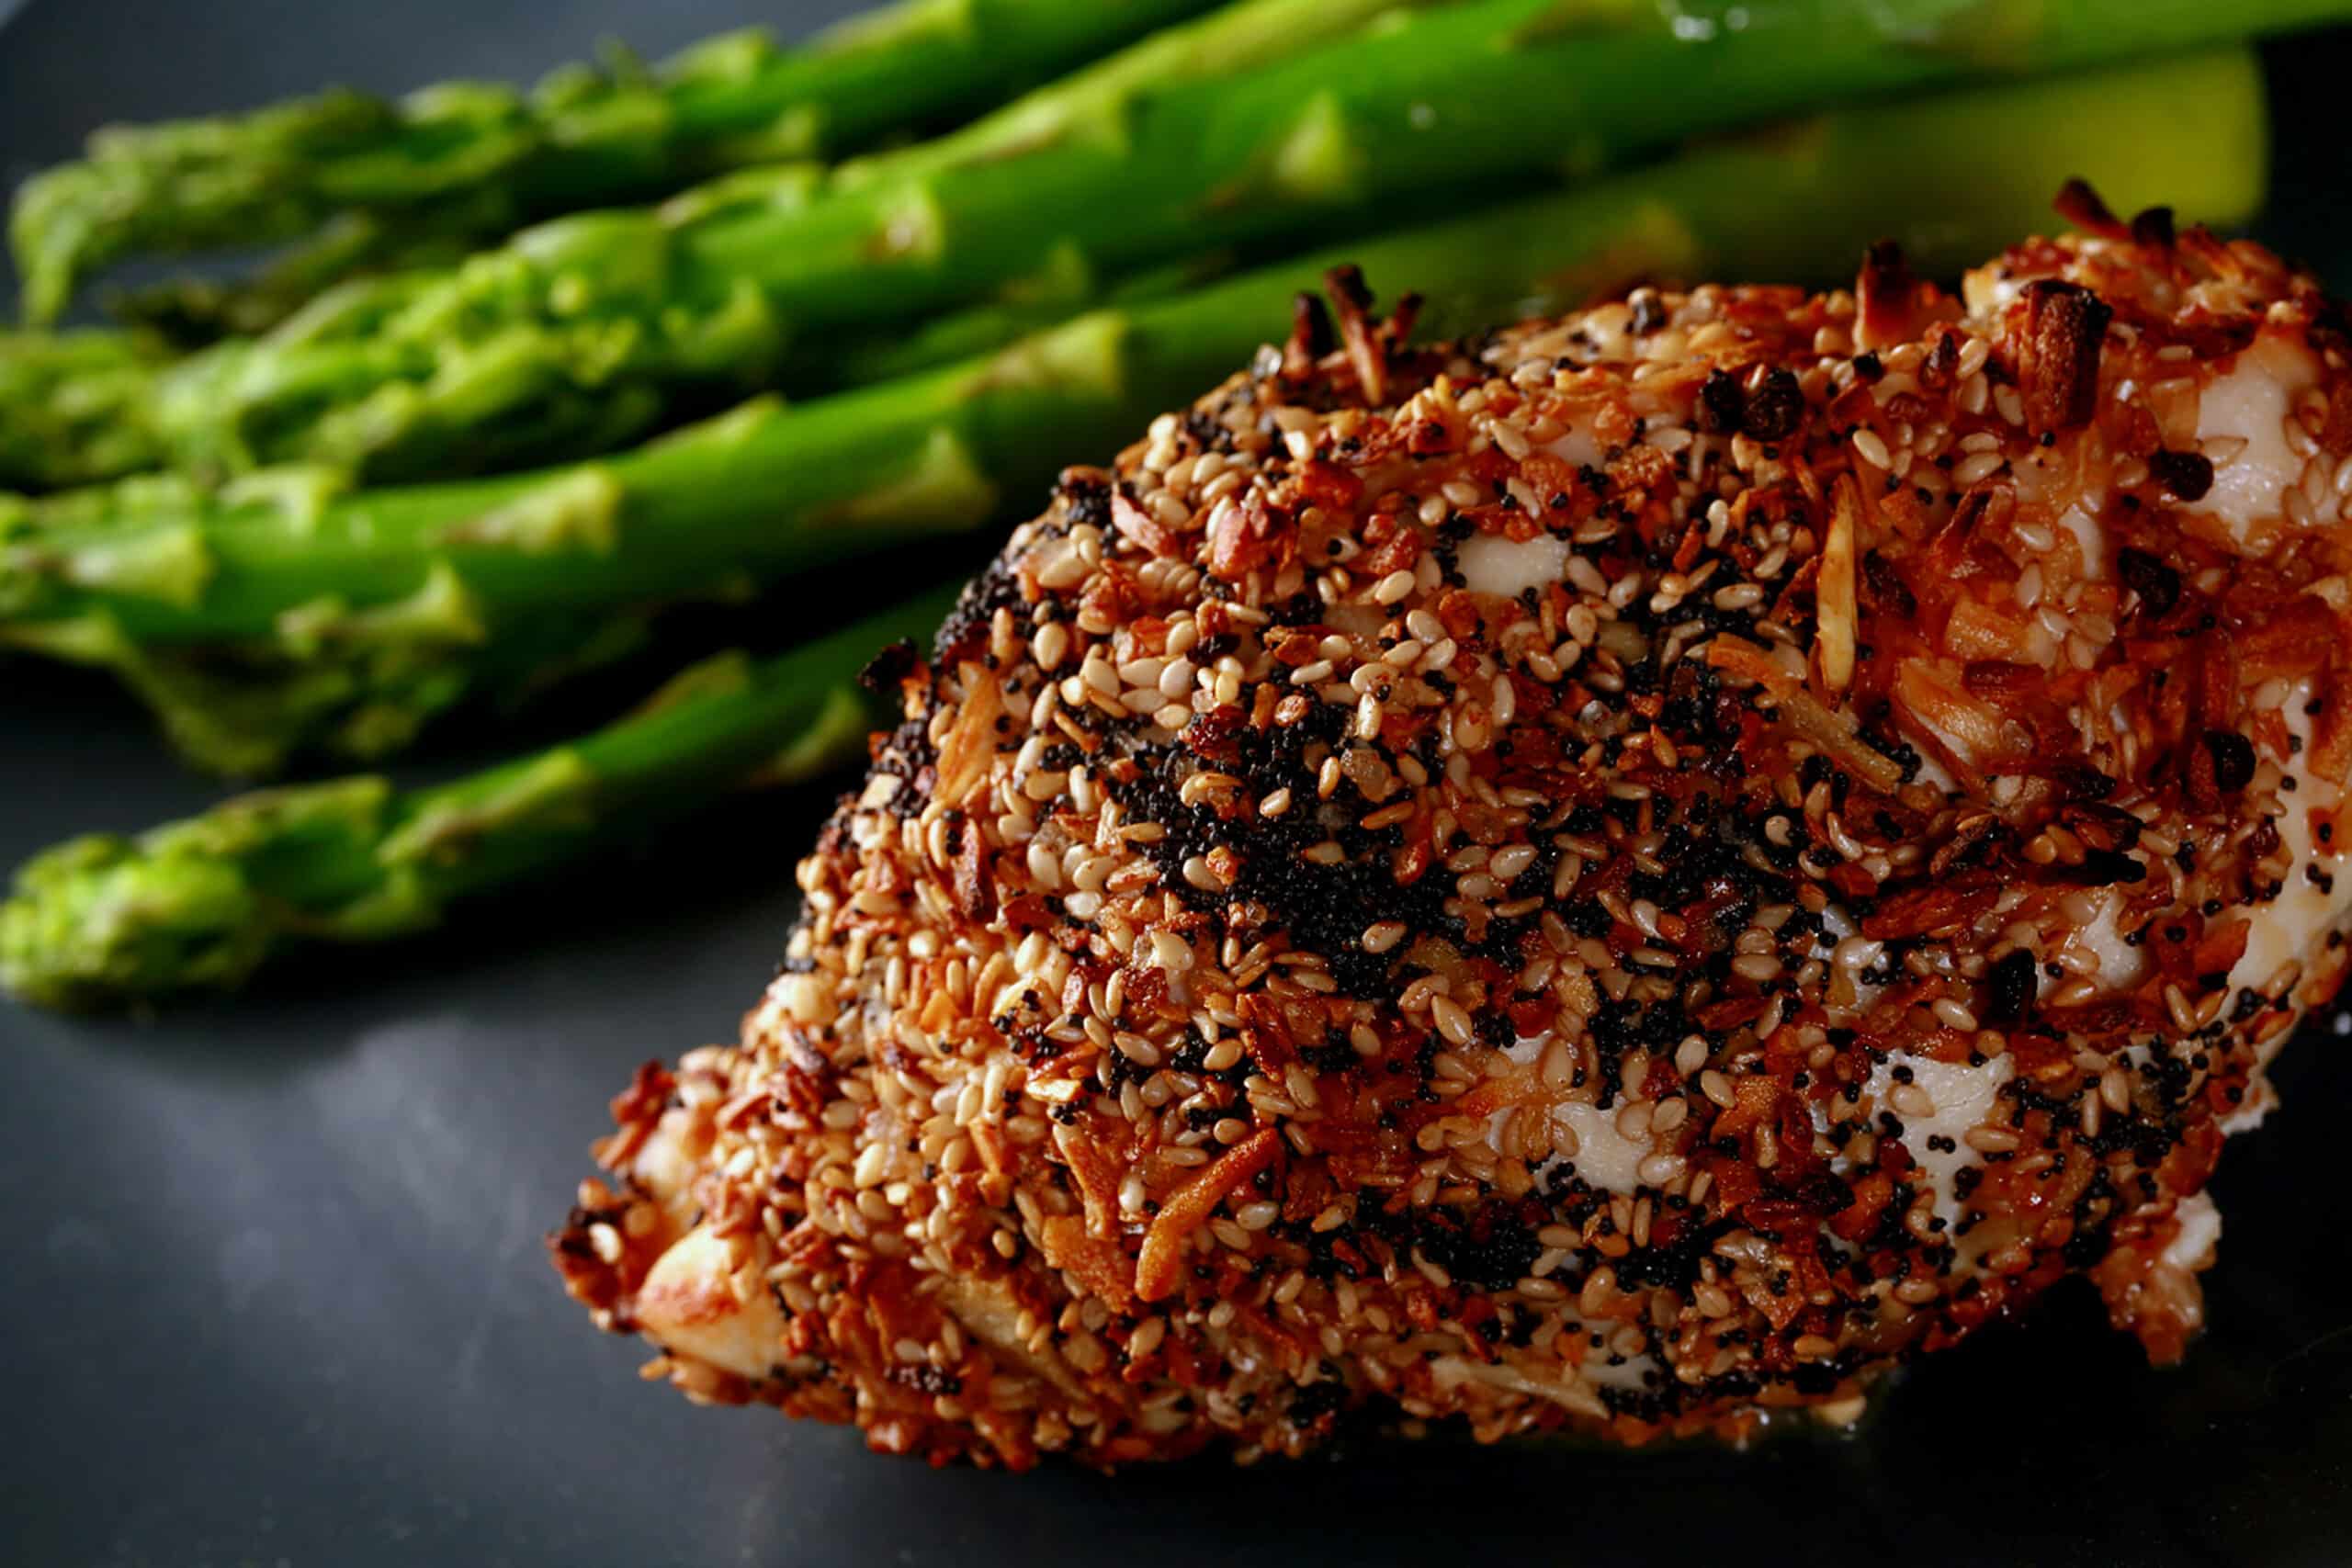 A roasted cream cheese stuffed everything chicken breast on a plate with some asparagus.